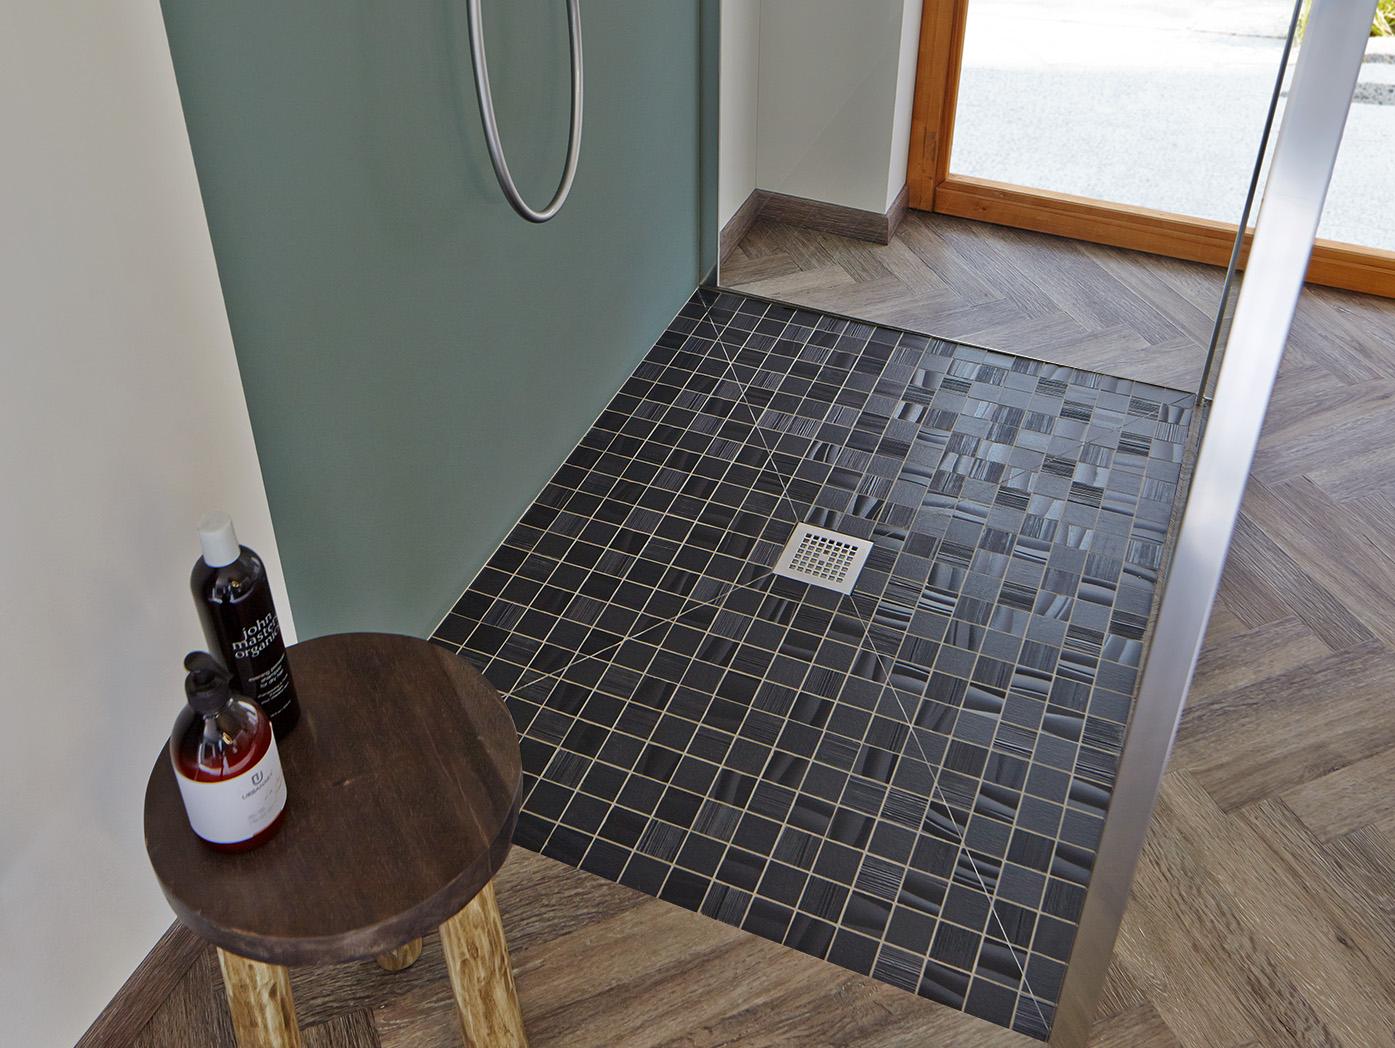 Kermi shower board with POINT point drain, can be tiled over individually